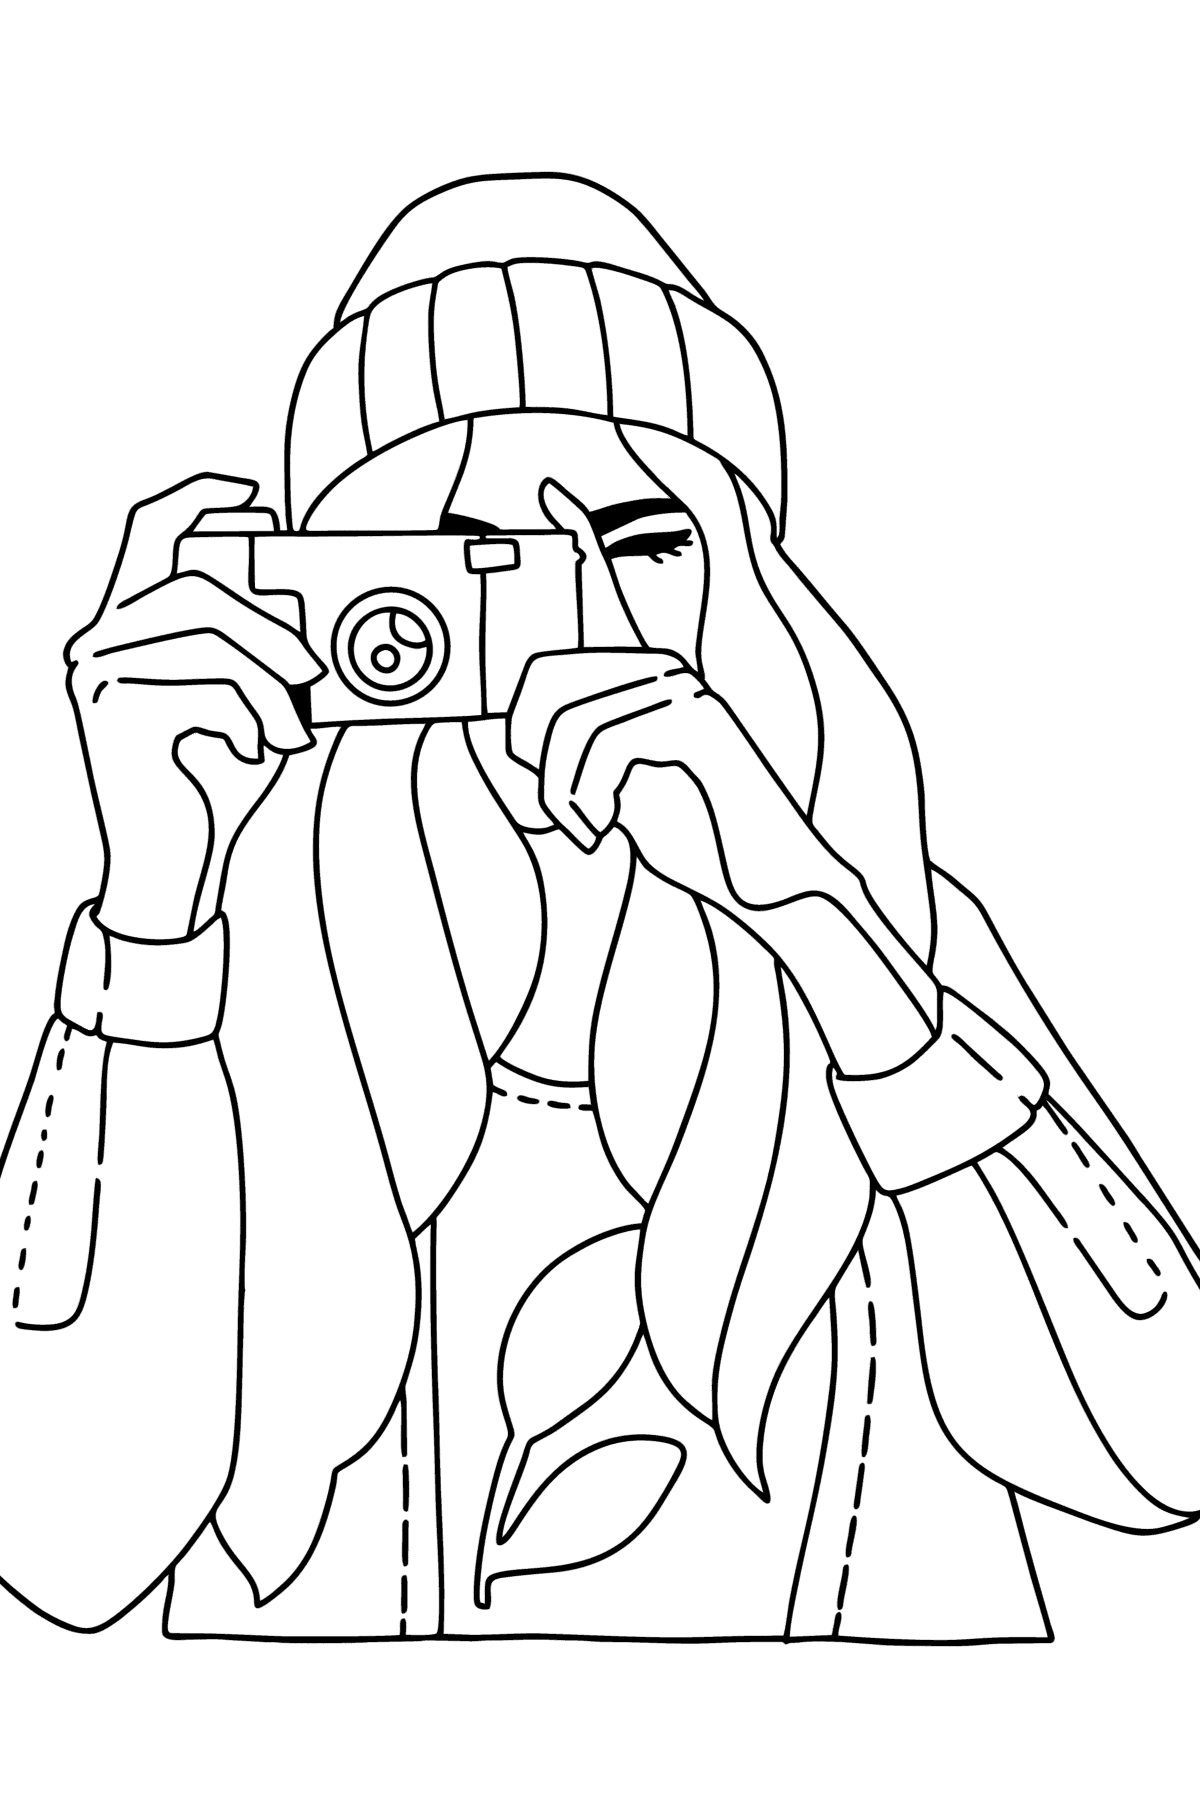 Girl photographer сoloring page - Coloring Pages for Kids